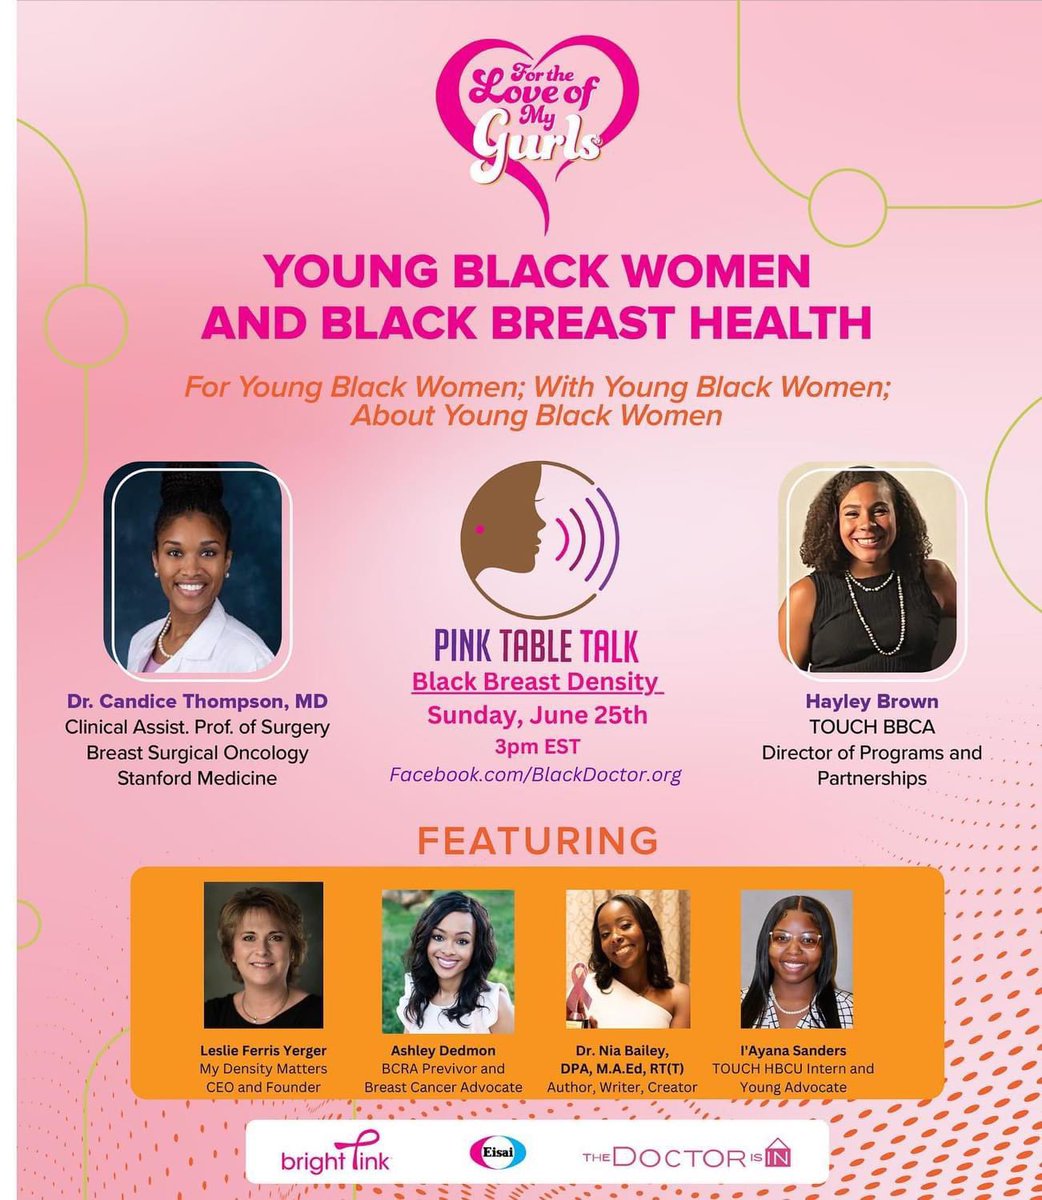 TODAY! #DenseBreasts
If you are a Black woman under 40, you probably don’t know if you have dense breasts because you have never had a mammogram. Chances are you do and therefore you have a 4 to 6 higher chance of getting breast cancer. Join us! 
#pinktabletalk
#loveofmygurls